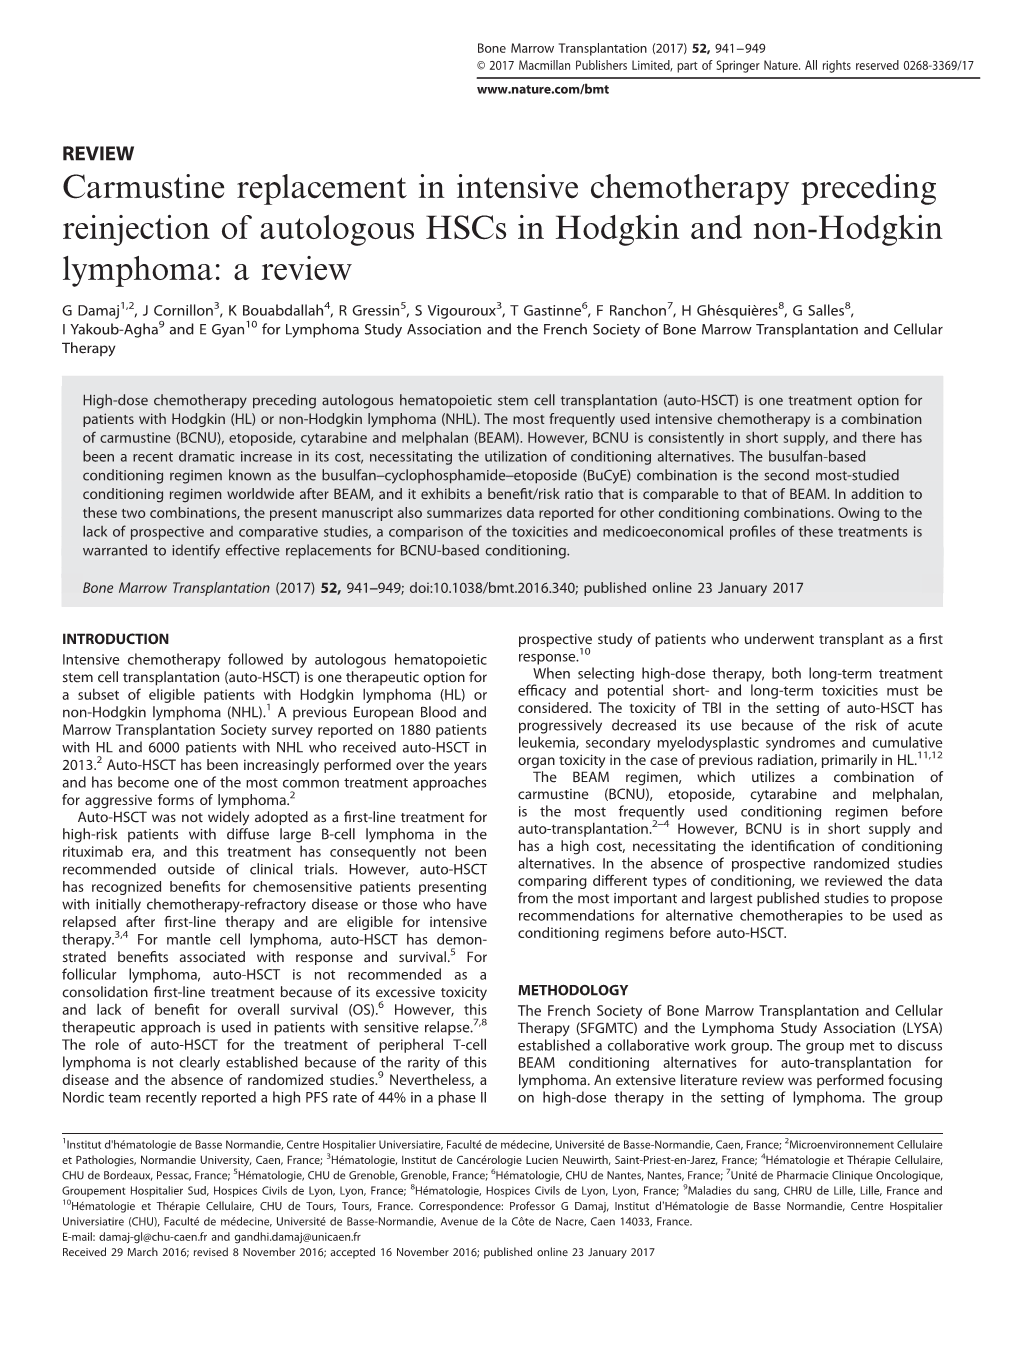 Carmustine Replacement in Intensive Chemotherapy Preceding Reinjection of Autologous Hscs in Hodgkin and Non-Hodgkin Lymphoma: a Review